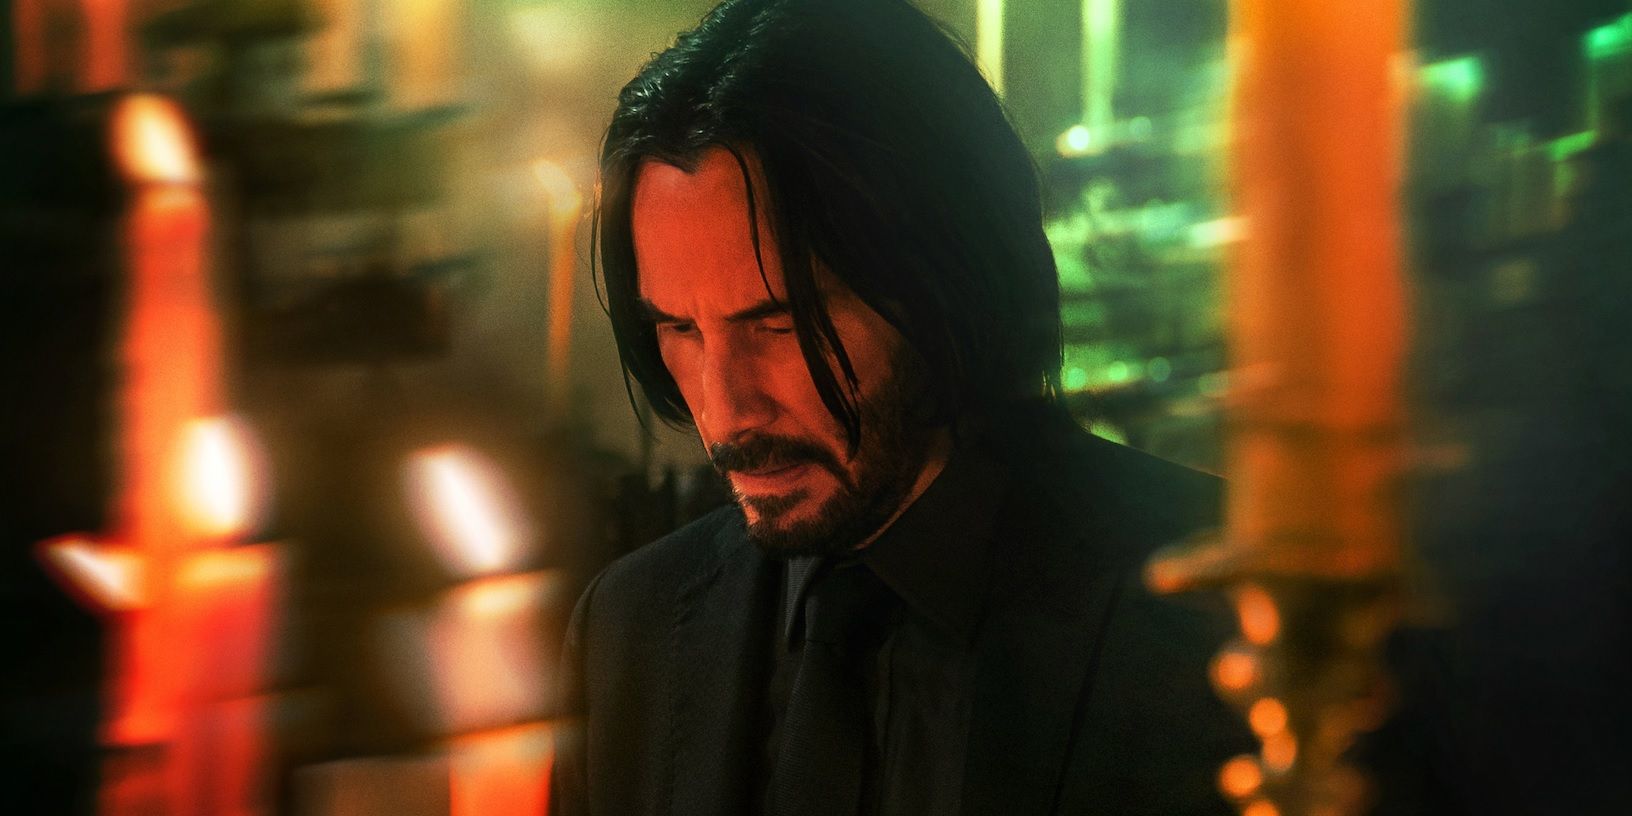 John Wick lights a candle in a church in John Wick Chapter 4